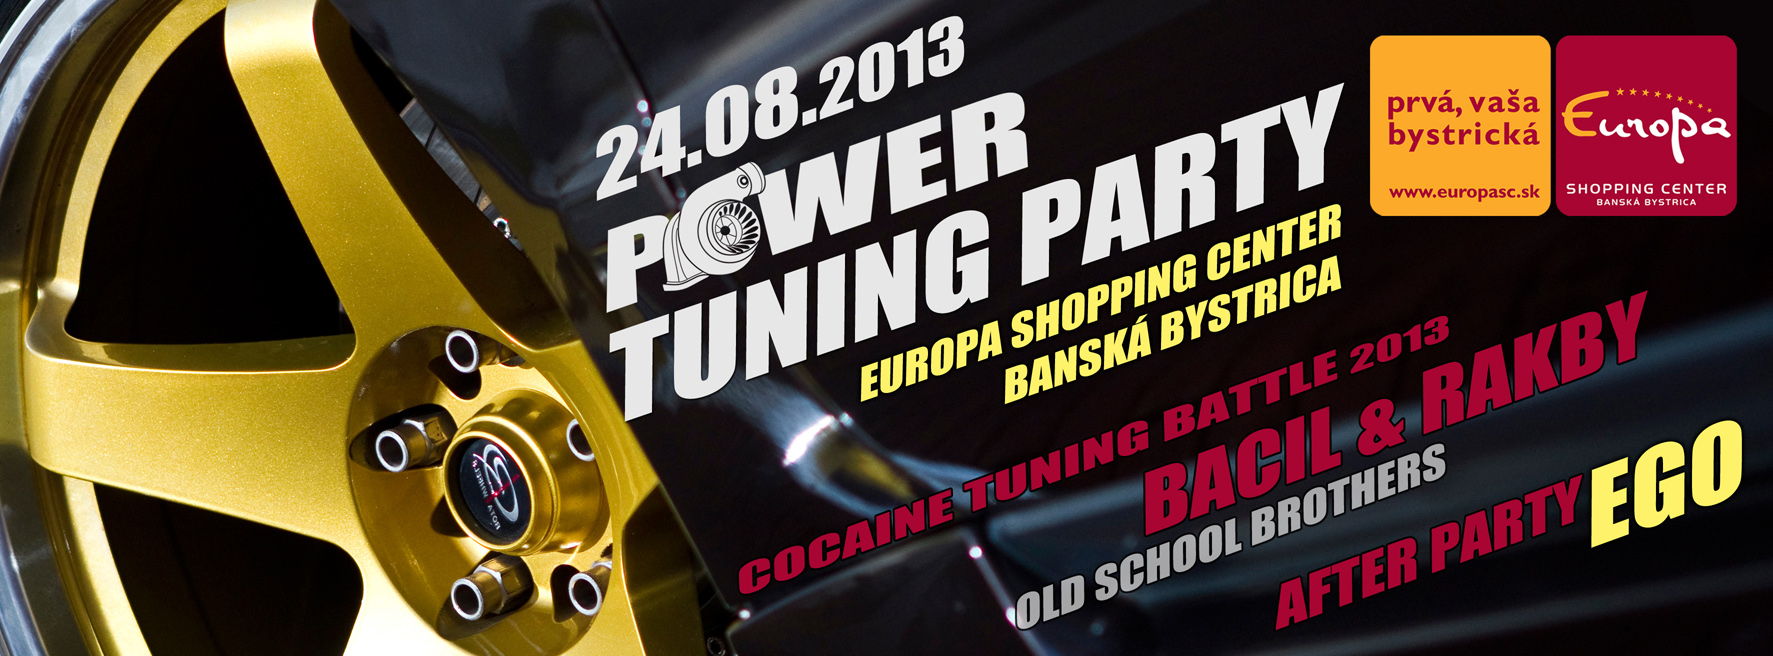 Power Tuning party